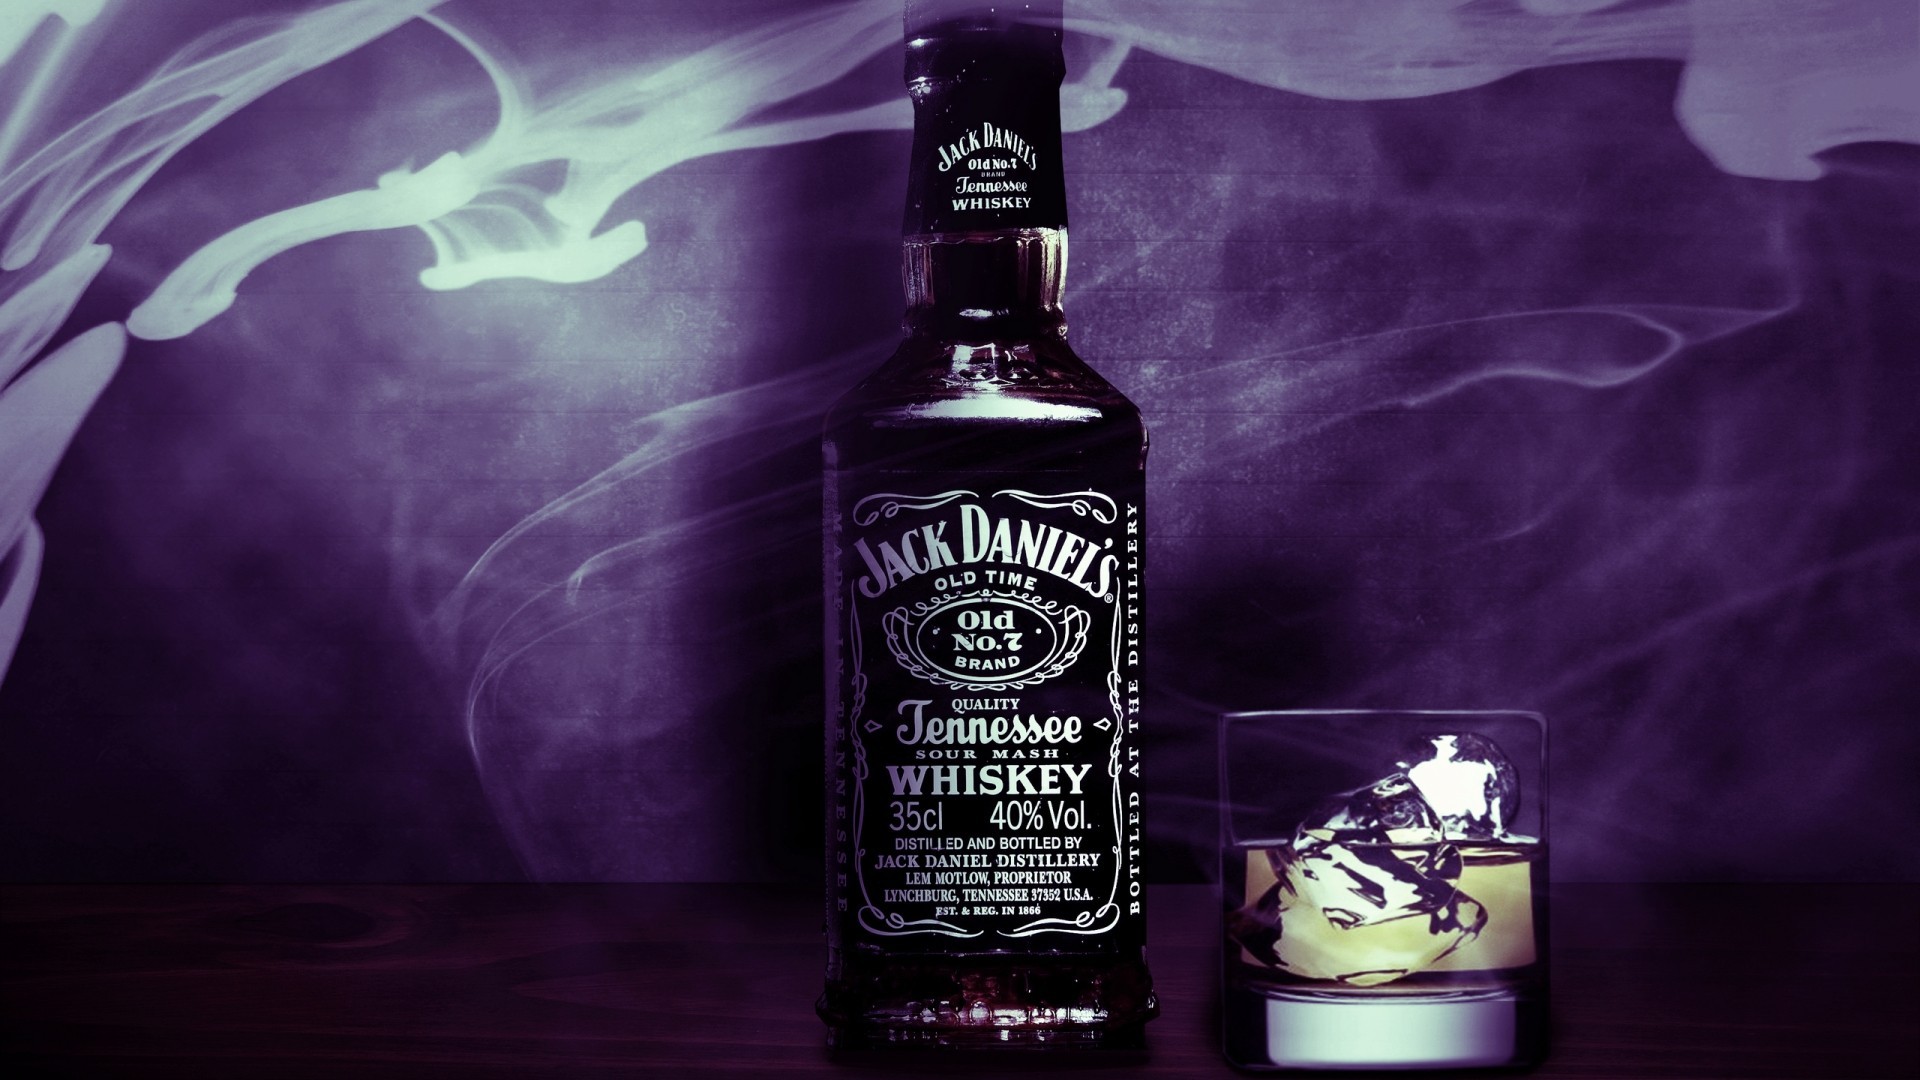 General 1920x1080 Jack Daniel's alcohol purple whisky glass whiskey ice cubes still life drinking glass numbers brand bottles